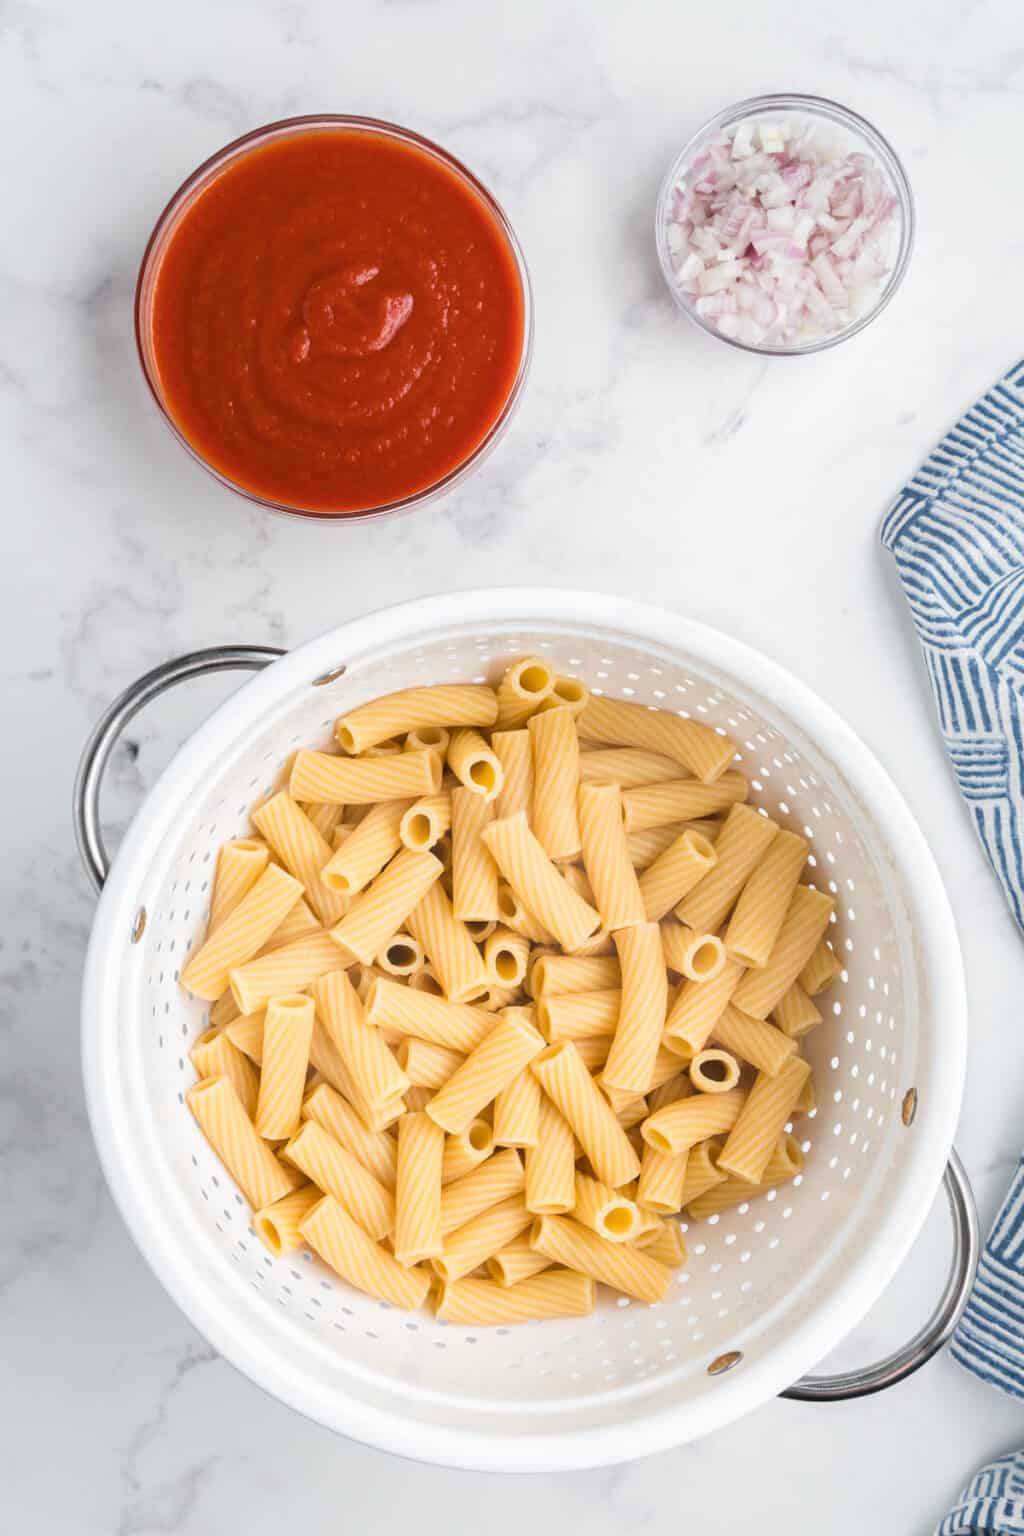 One Pot Pink Sauce Pasta With Boursin Cheese - Salt & Spoon